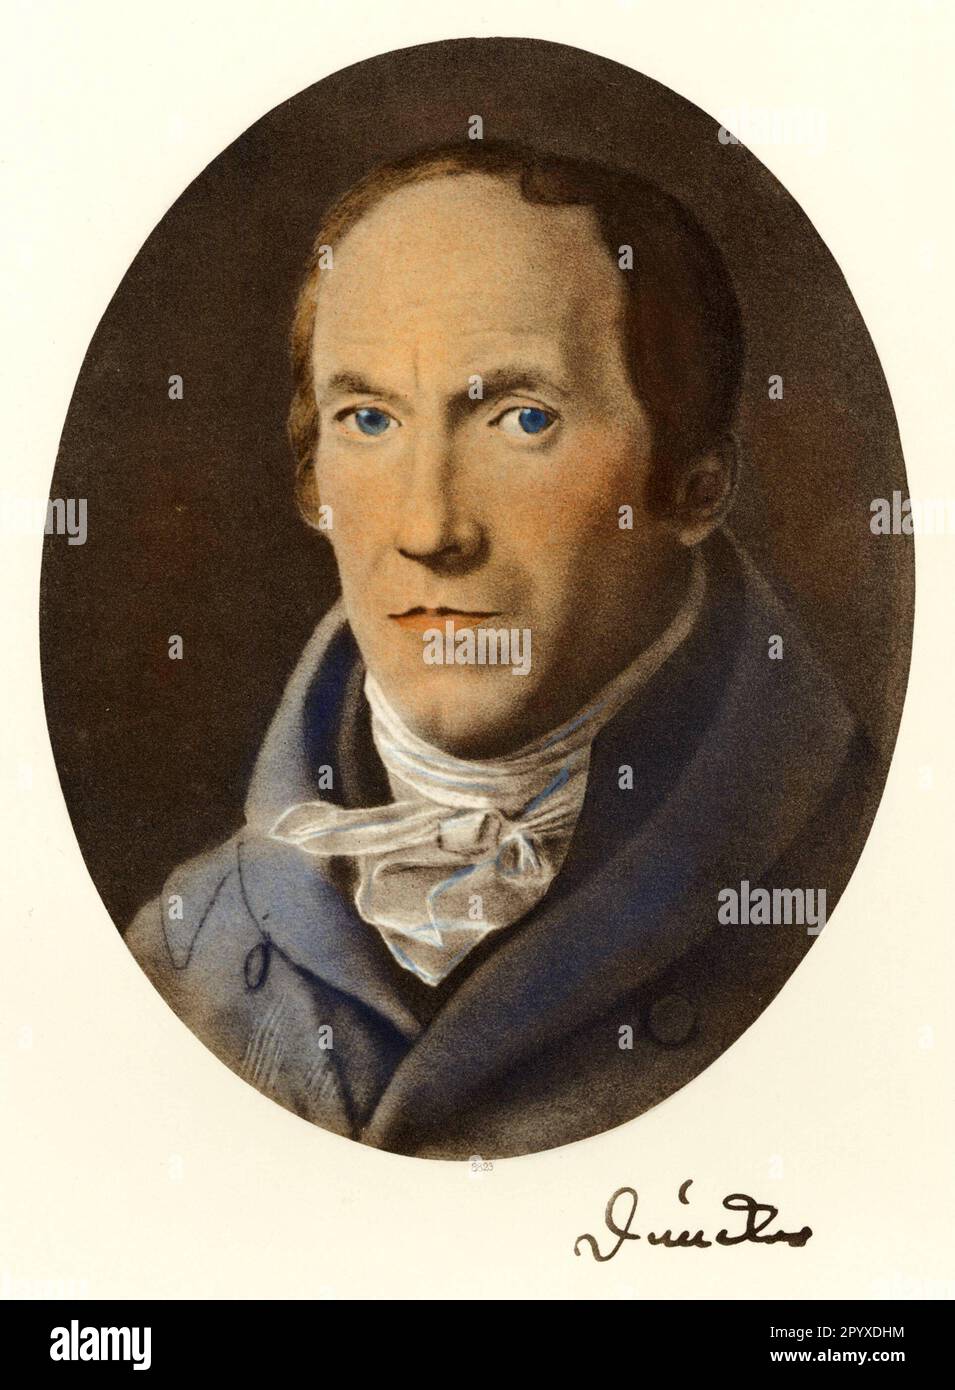 J. H. August Duncker (1764-1843), German optician. Painting by an unknown master. Photo: Heliogravure, Corpus Imaginum, Hanfstaengl Collection. [automated translation] Stock Photo